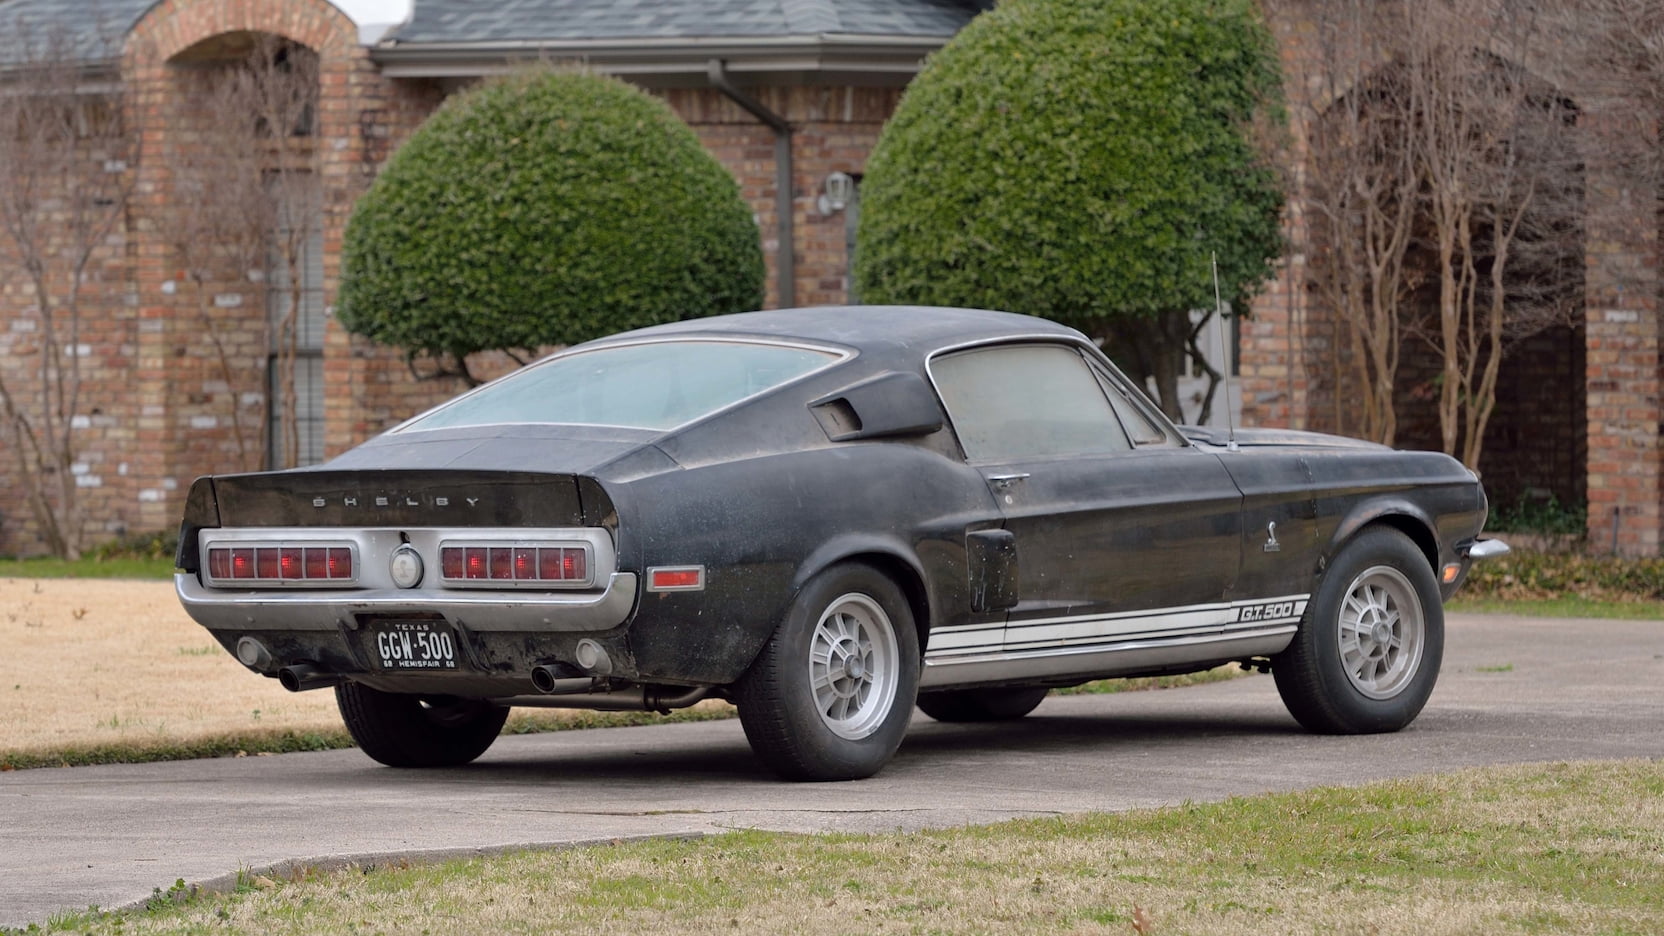 This barn find Shelby GT500 will be on the Mecum auction block next month. | Mecum photos